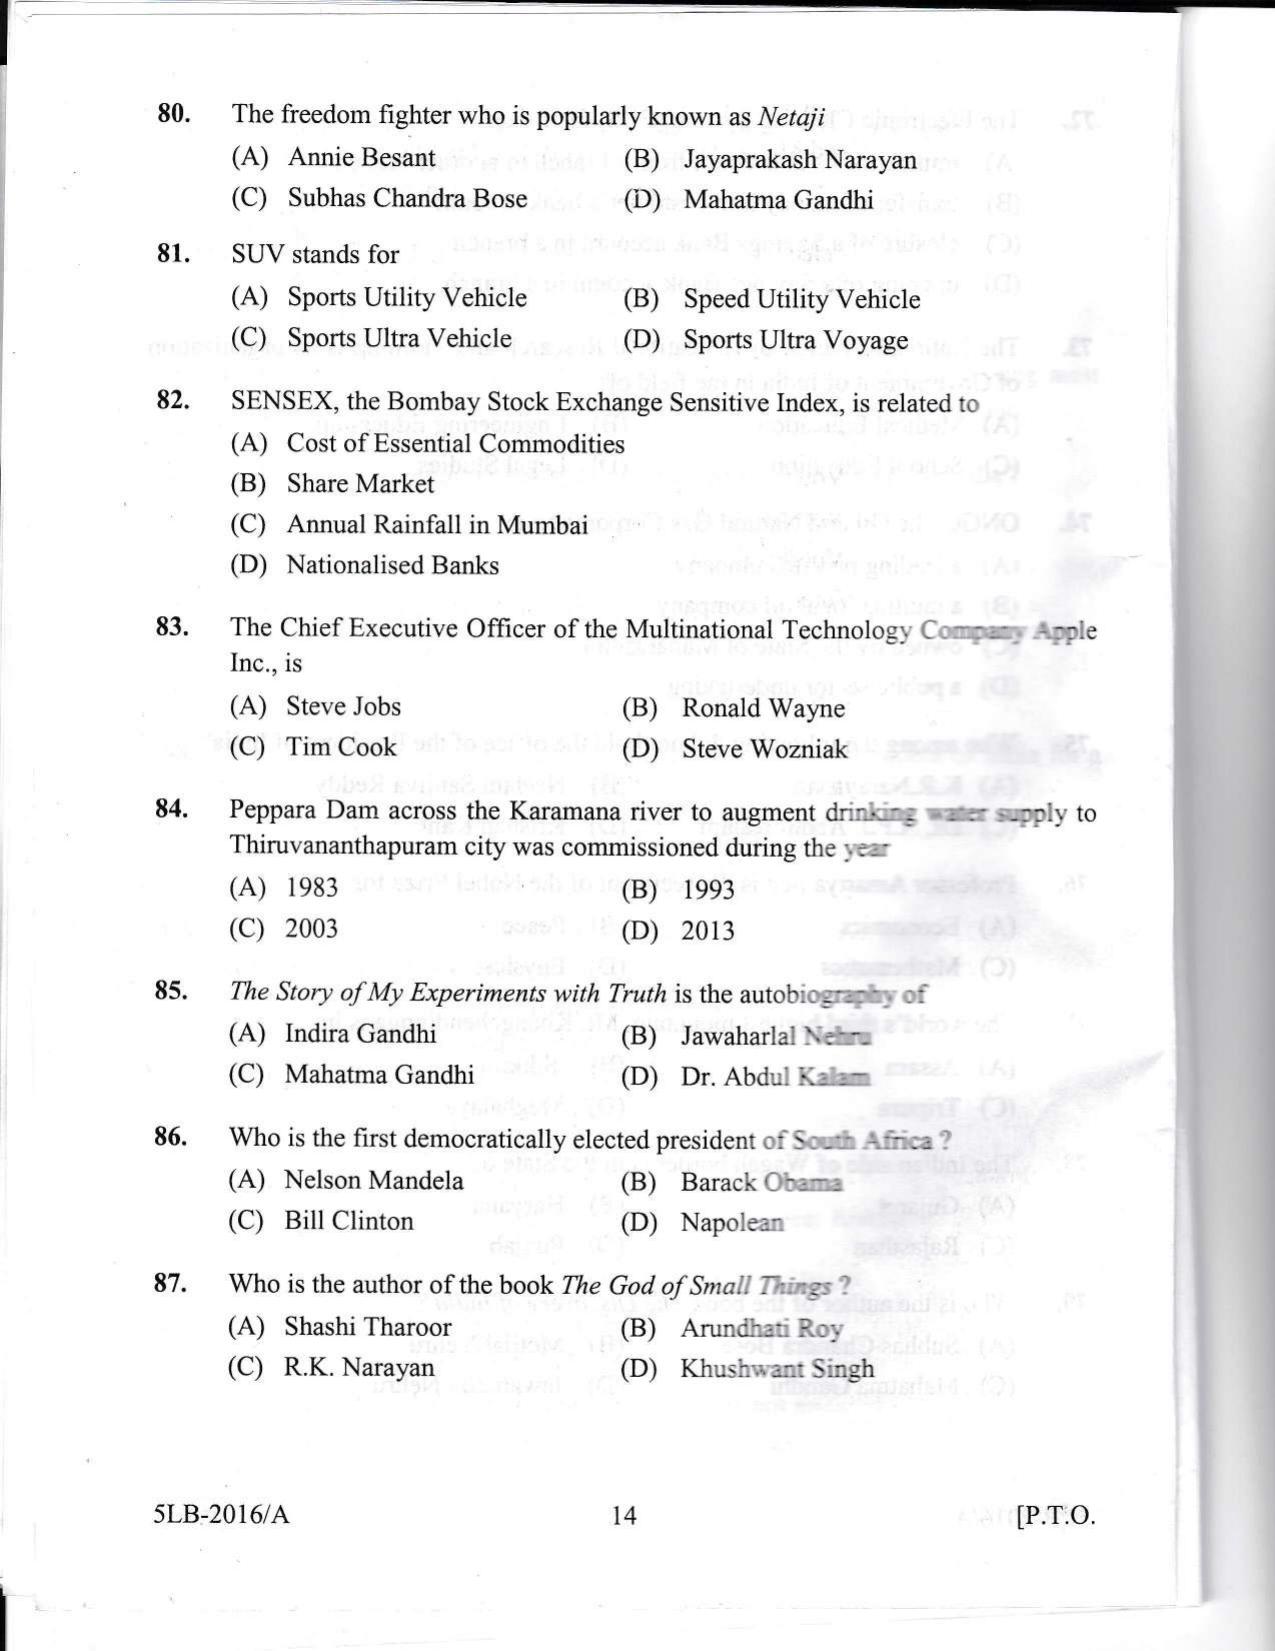 KLEE 5 Year LLB Exam 2016 Question Paper - Page 14